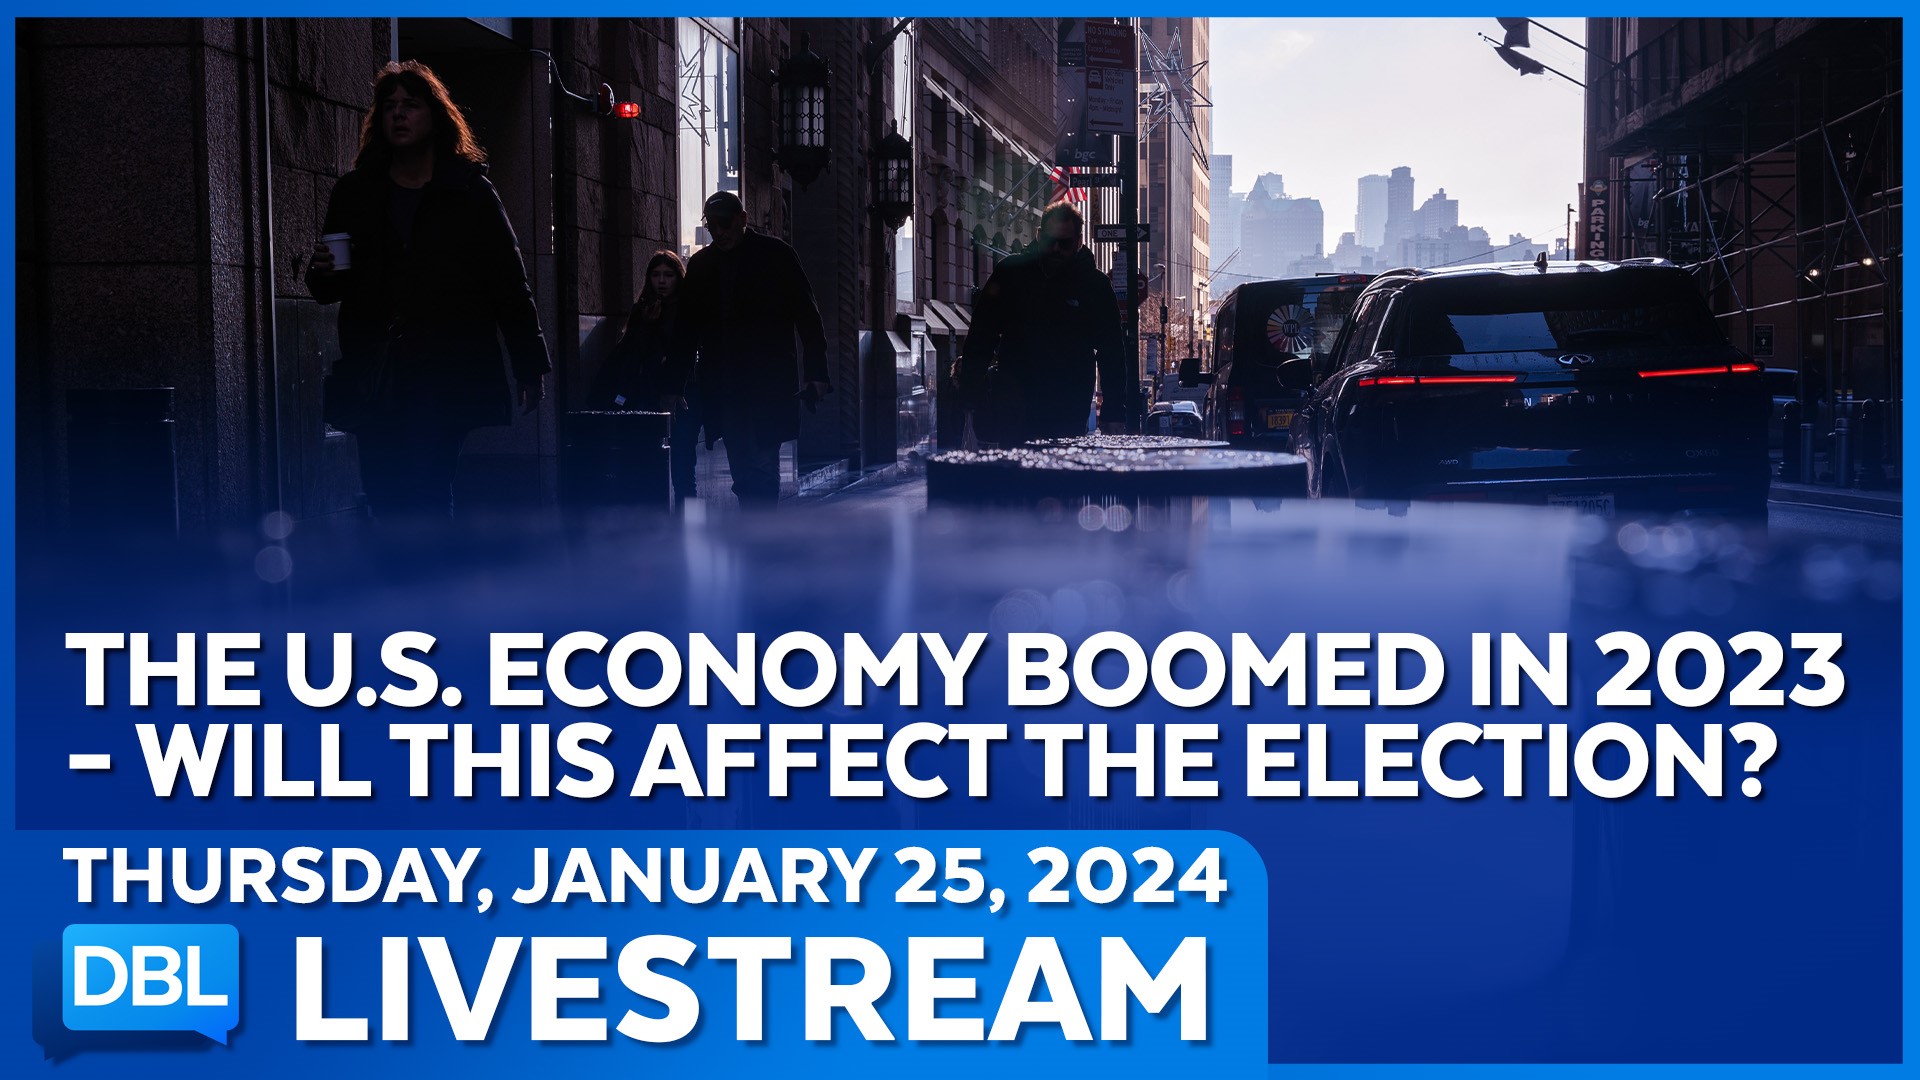 U.S. Economy Boomed In 2023, Will This Affect The Election?